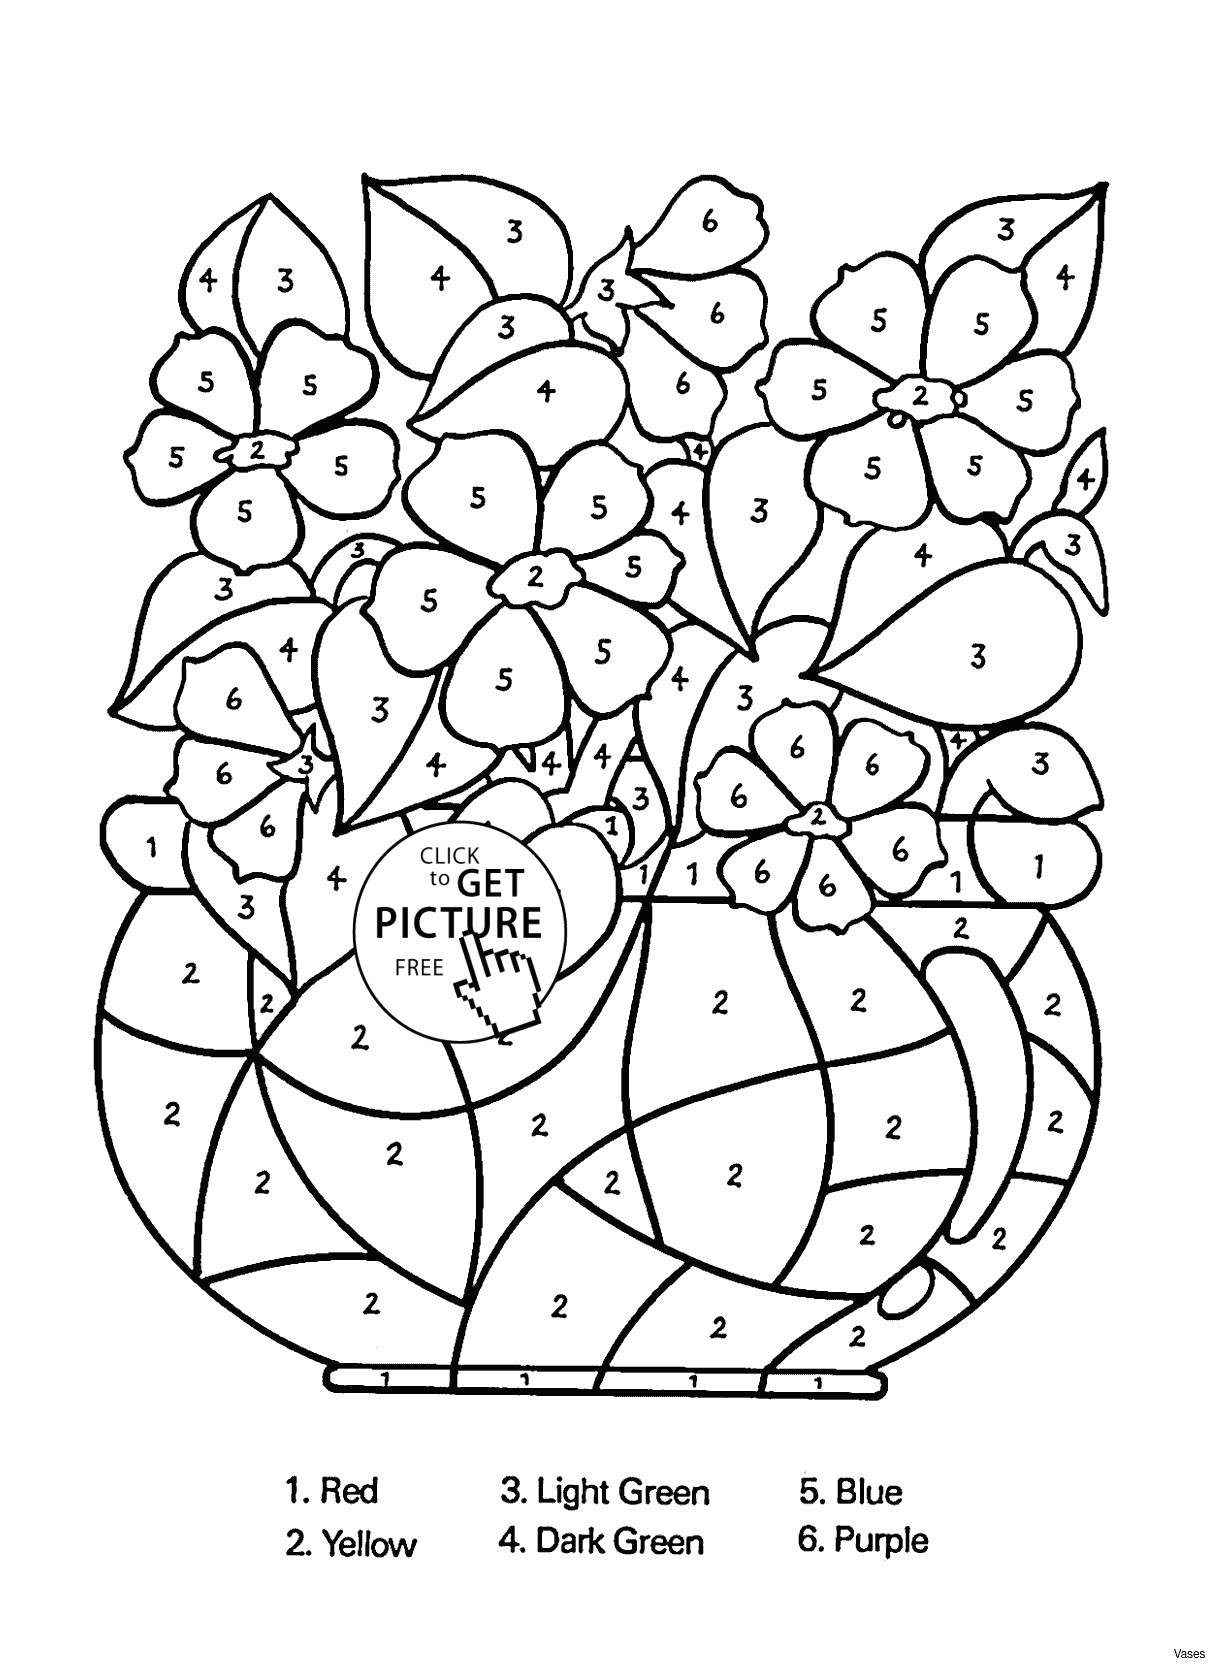 pics of drawings easy easy to draw rose elegant vases flower vase coloring page pages of